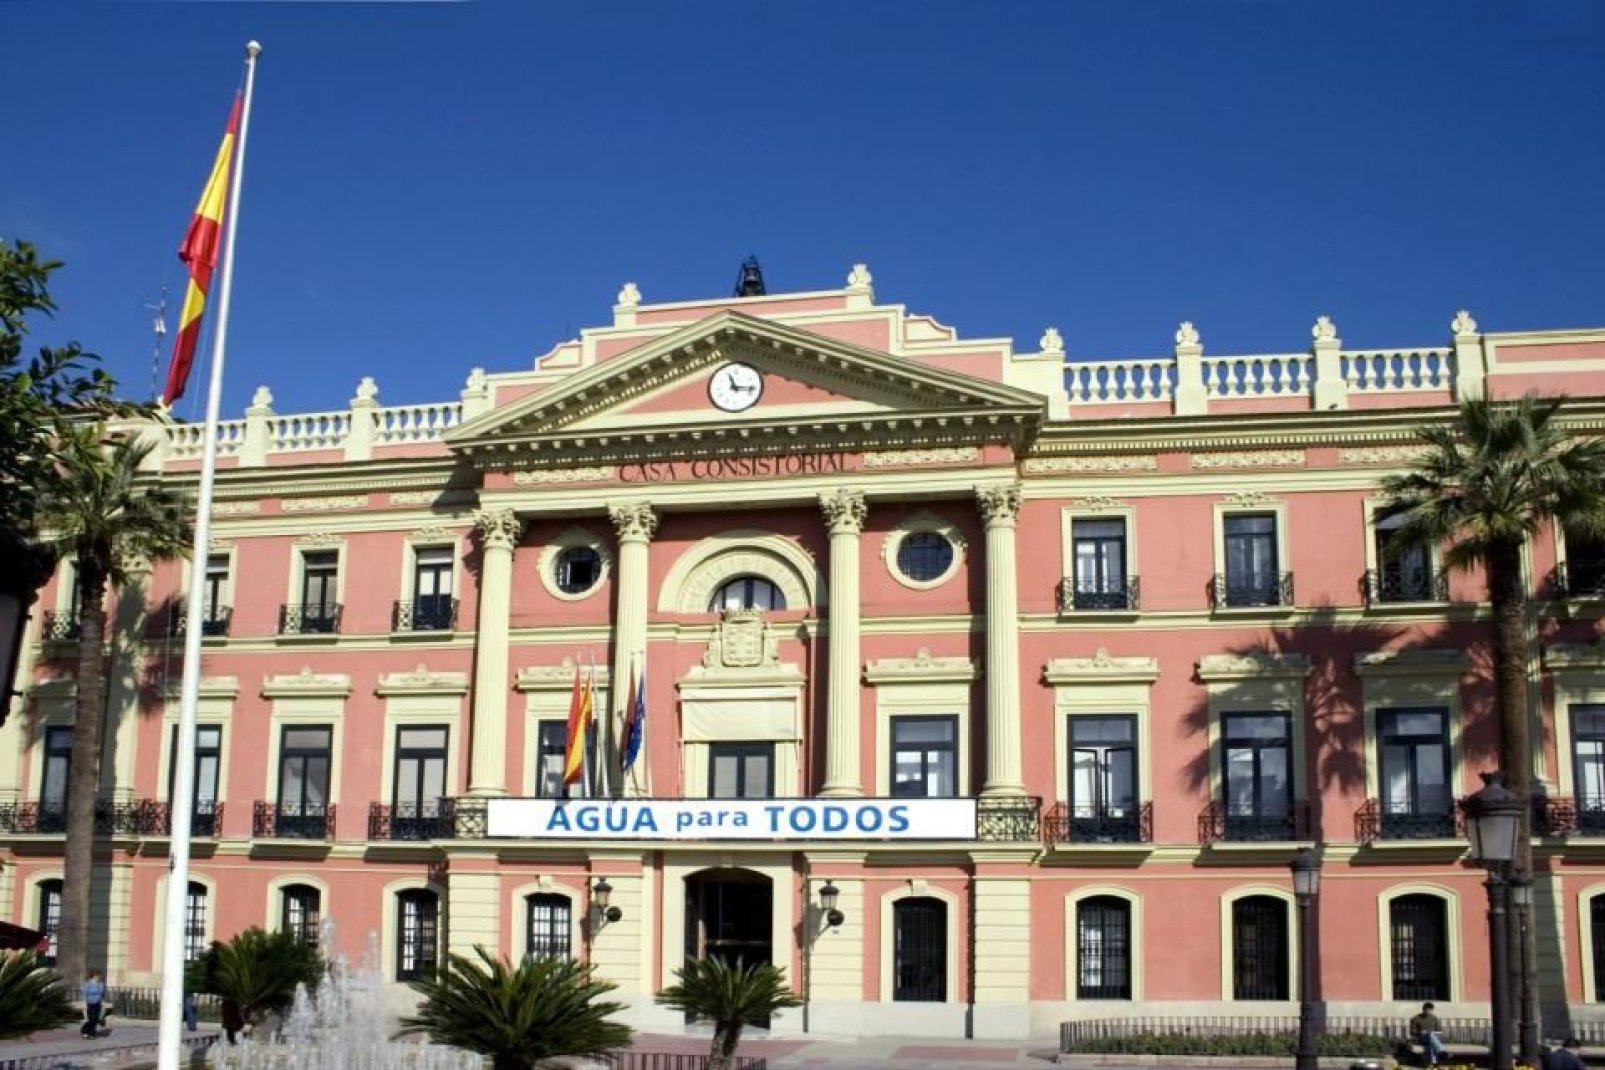 The town hall lies in the city square, known as The Glorieta.